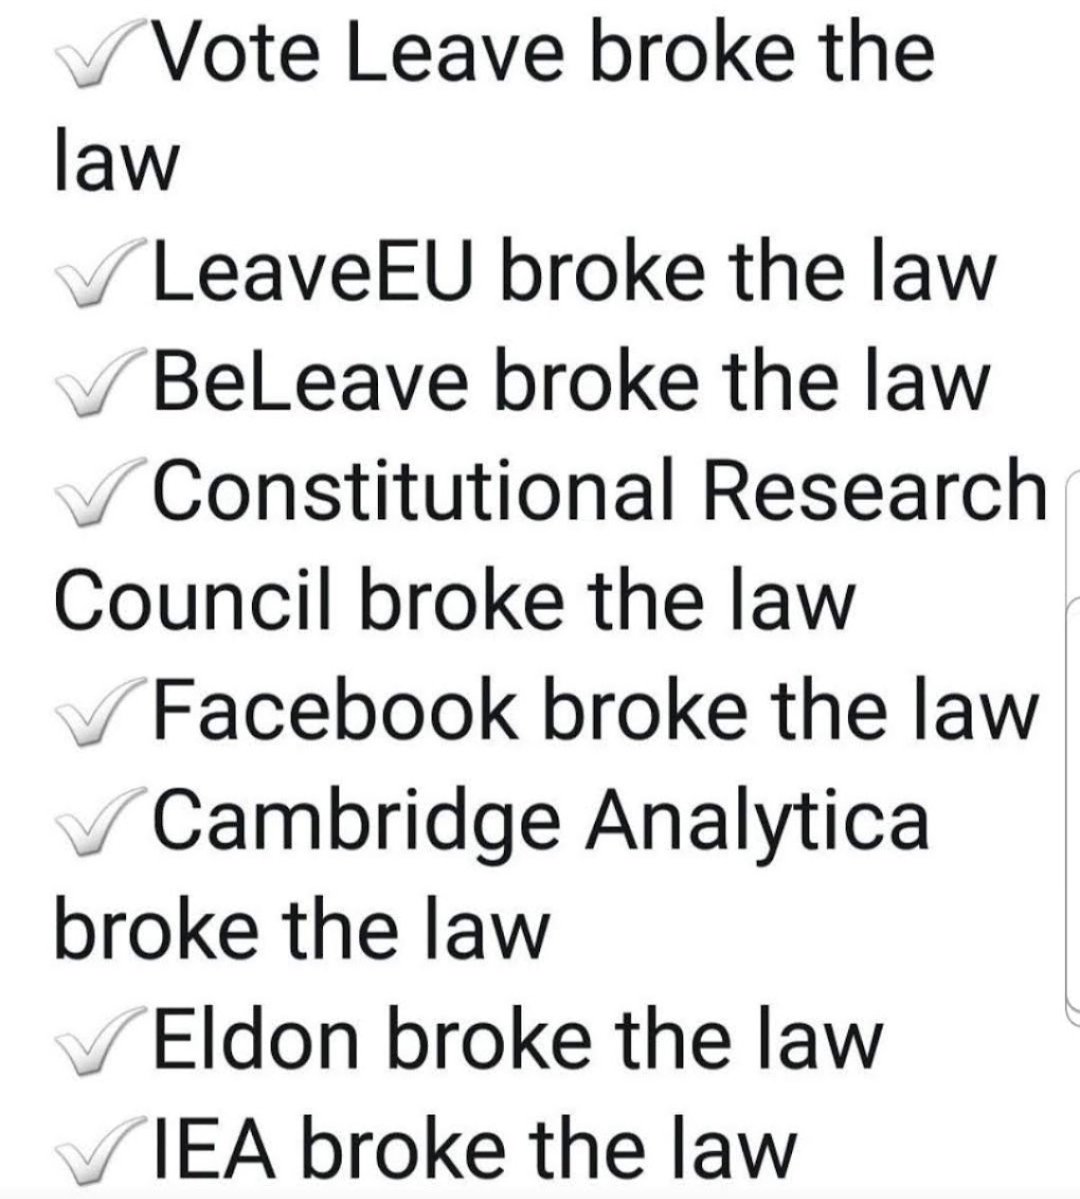 @AncientGleek @SusanChubb1 @Bliadhnaichean @jeremycorbyn @Keir_Starmer @UKLabour Corbyn who instructed his front bench 'not to attend' the 200,000+ signature petition hearing 'withdraw A50 if VoteLeave broke the law', about 2 months after it was proven that Vote Leave broke the law.